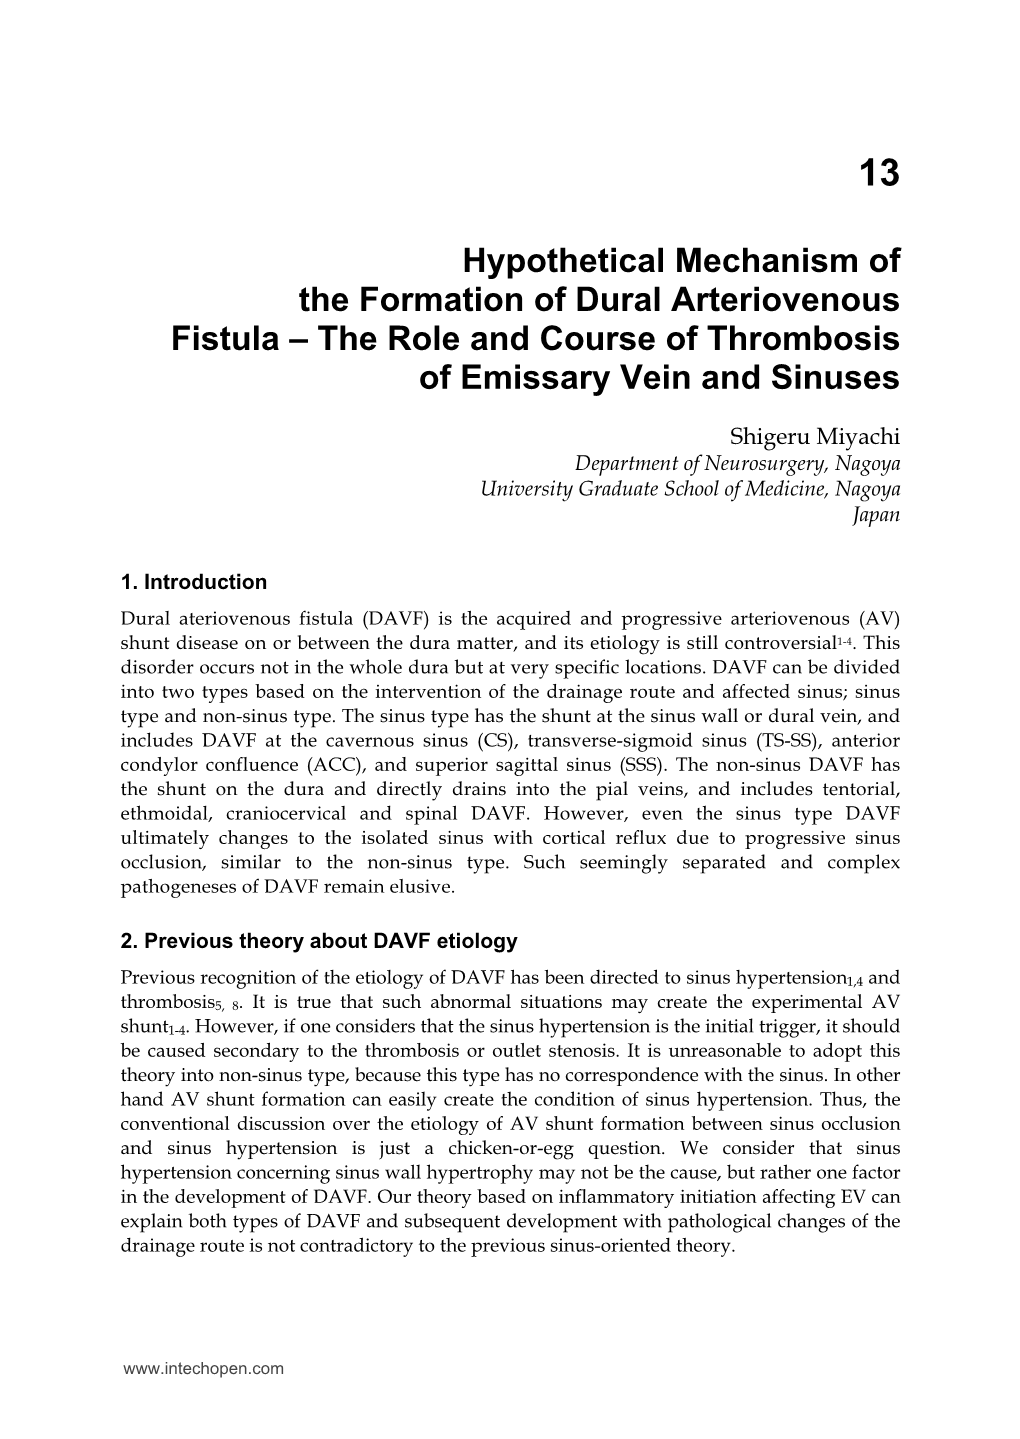 Hypothetical Mechanism of the Formation of Dural Arteriovenous Fistula – the Role and Course of Thrombosis of Emissary Vein and Sinuses